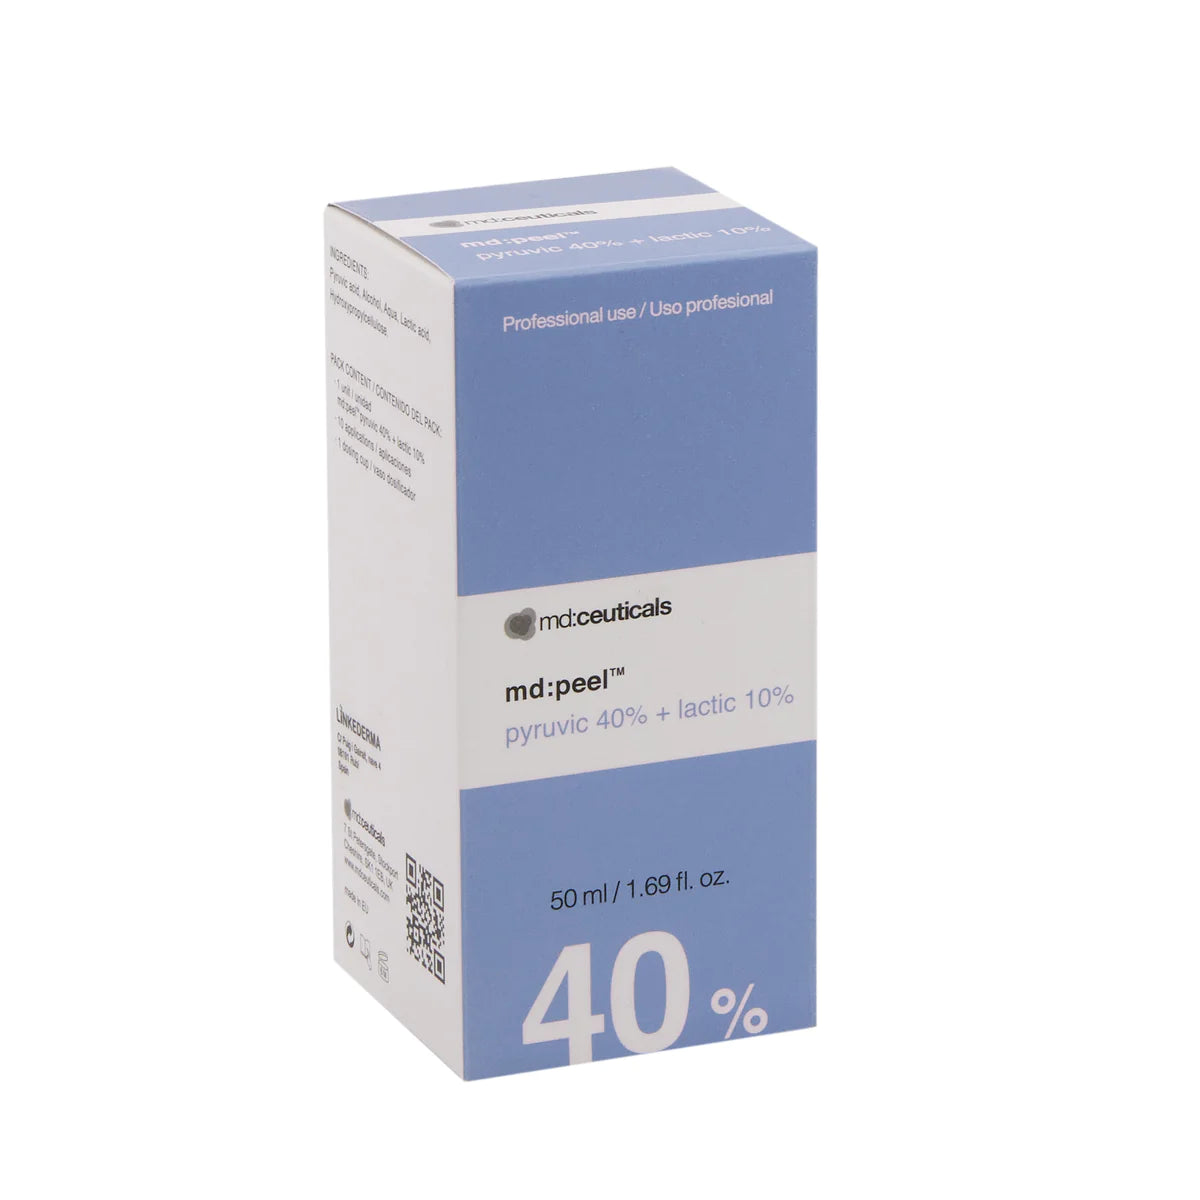 md:ceuticals peel pyruvic 40% + lactic 10%